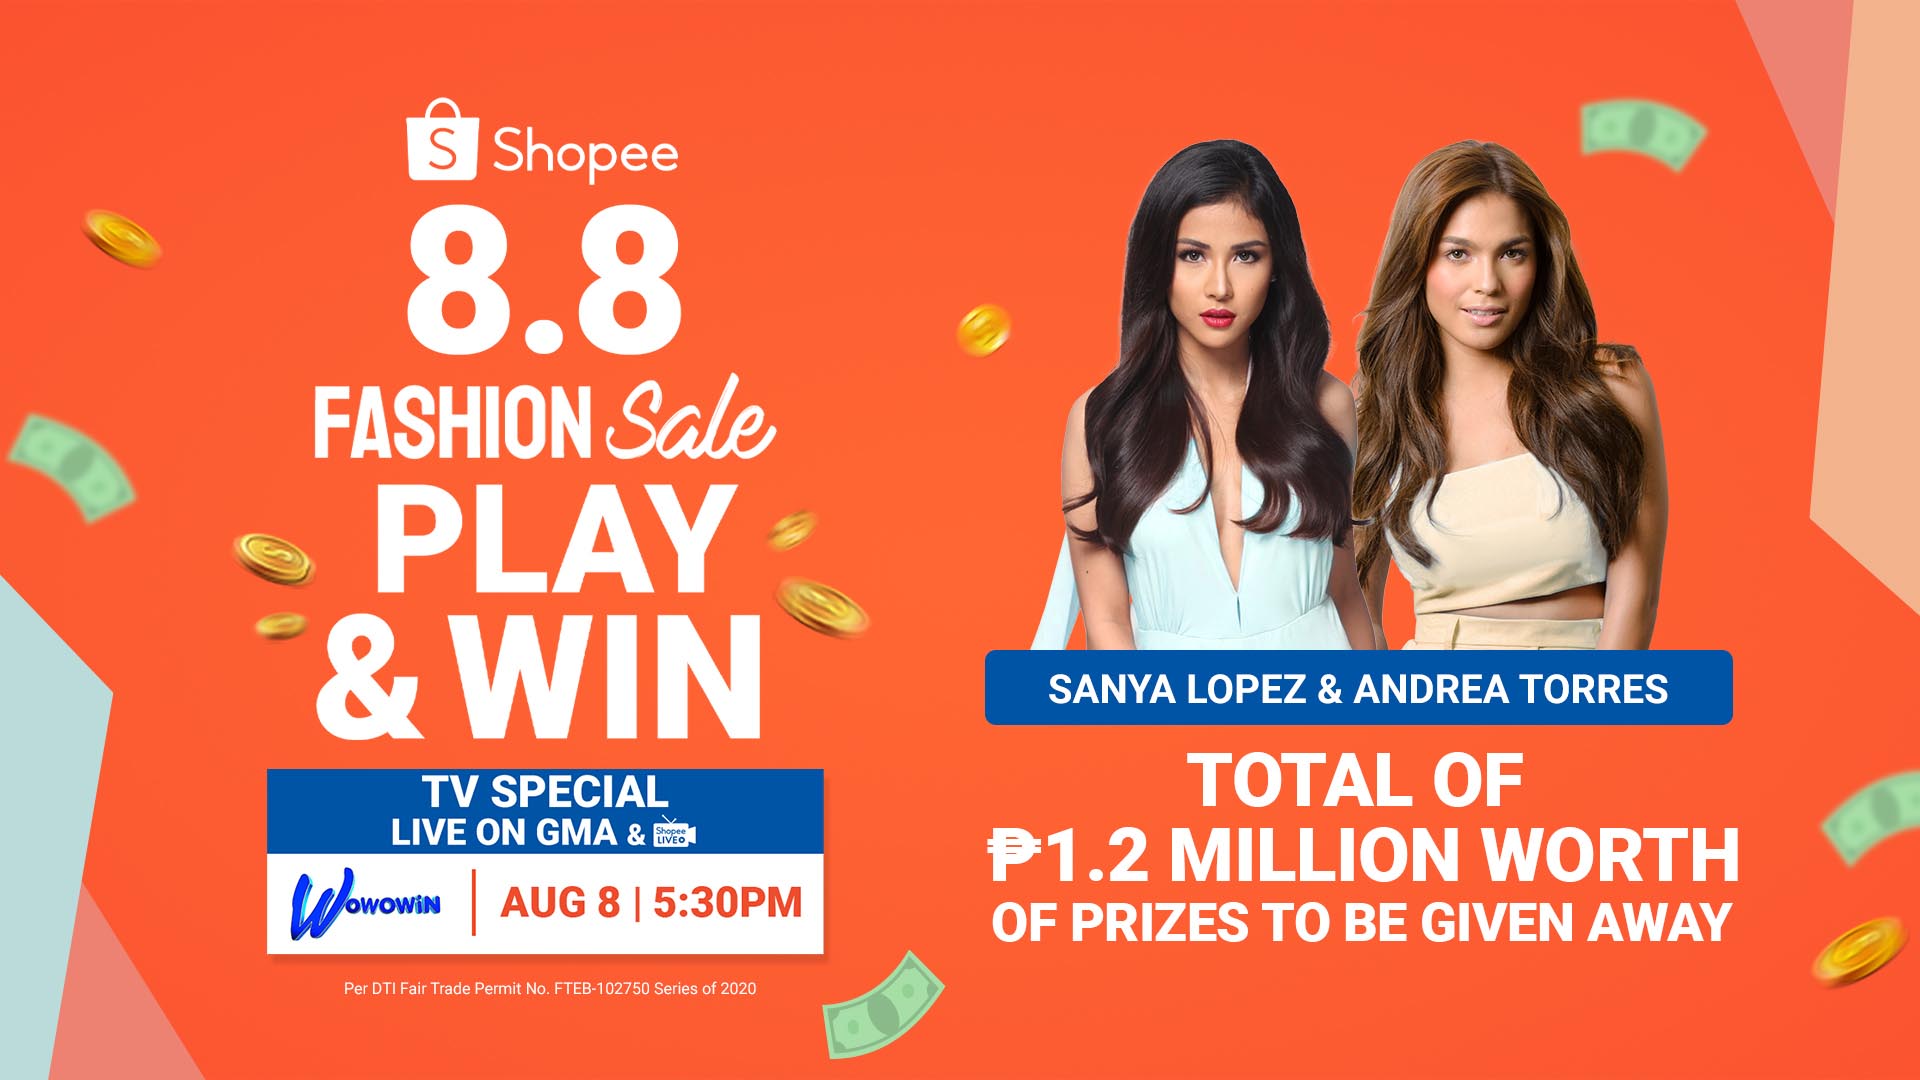 Catch the Shopee 8.8 Play & Win TV Special on Wowowin and Win a Total of ?1.2 Million Worth of Prizes